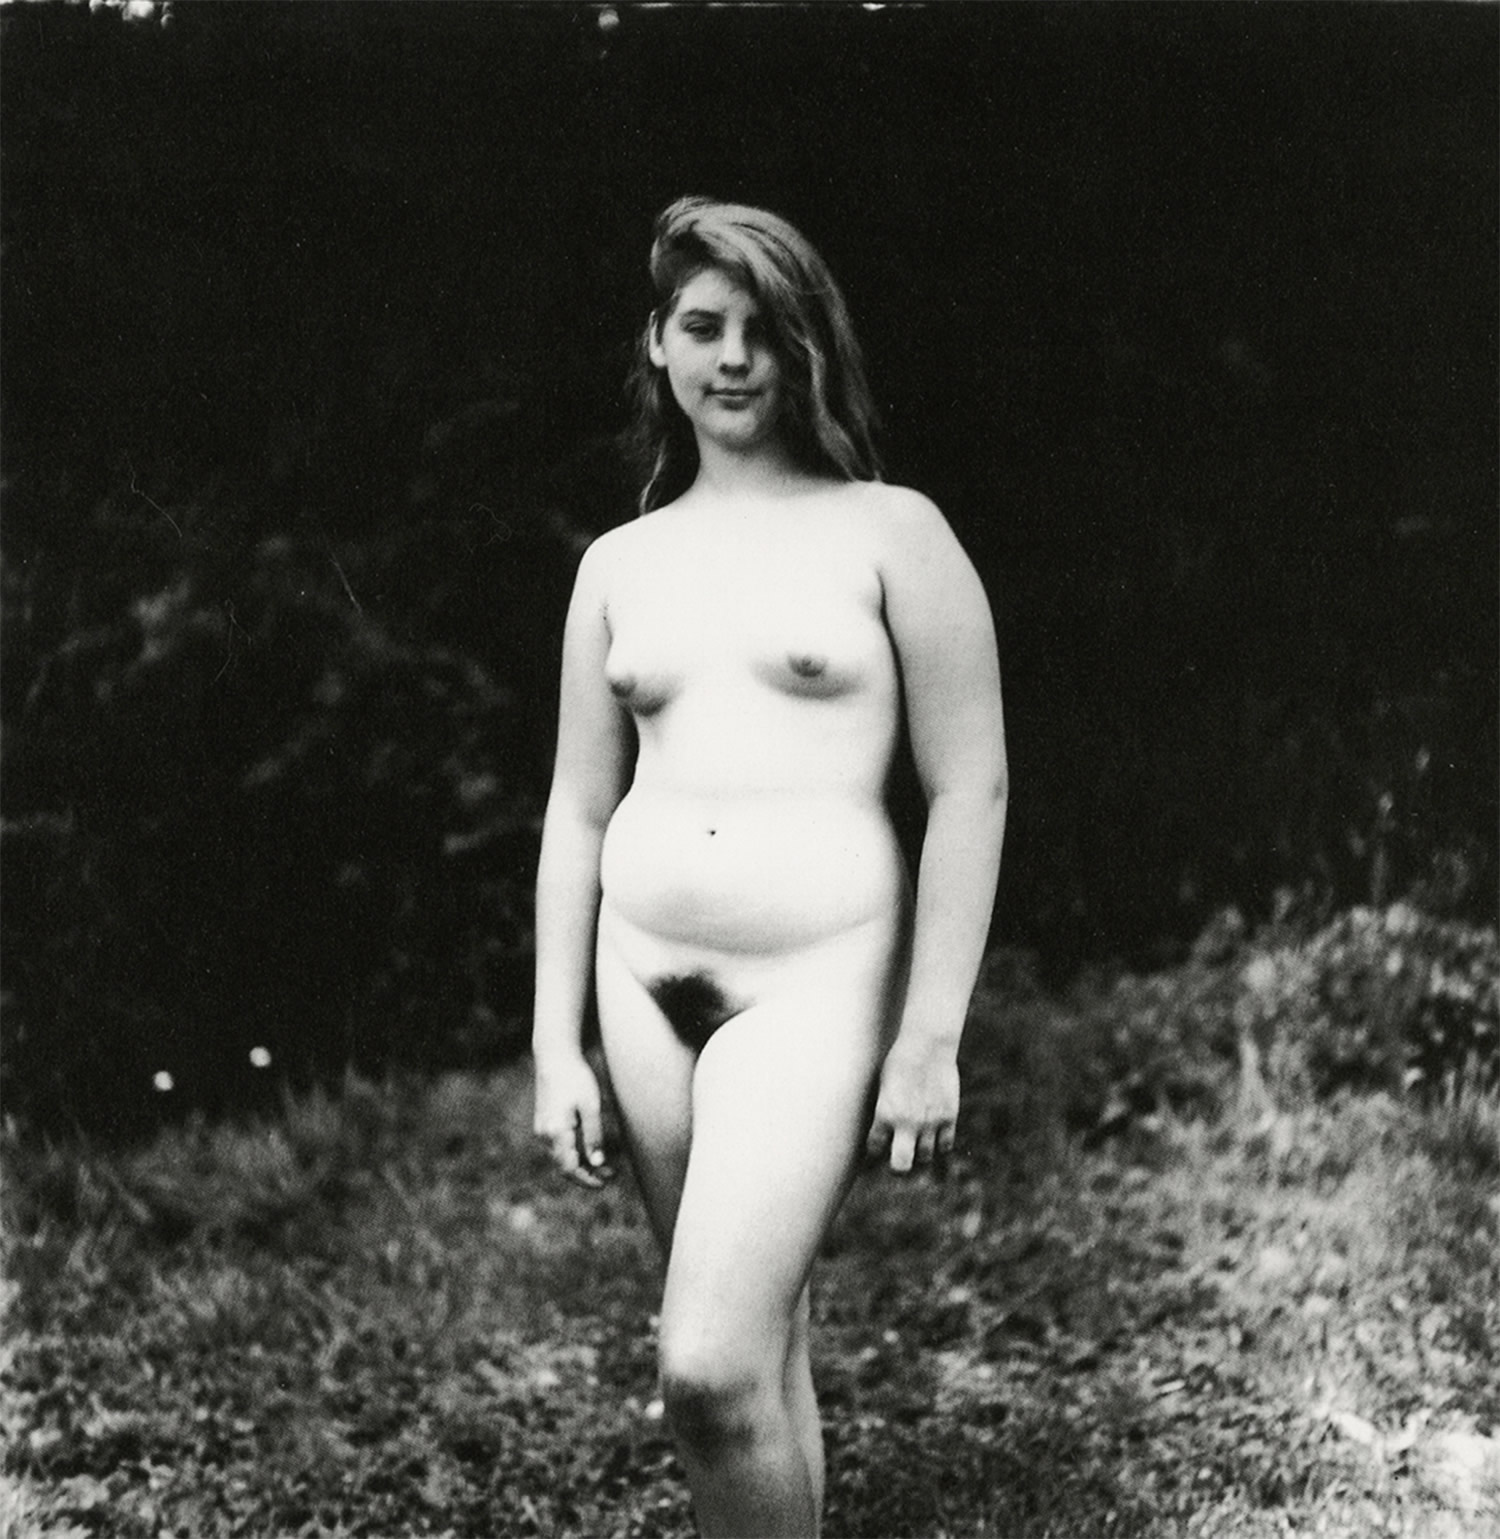 A young girl at a nudist camp, Pa., 1965